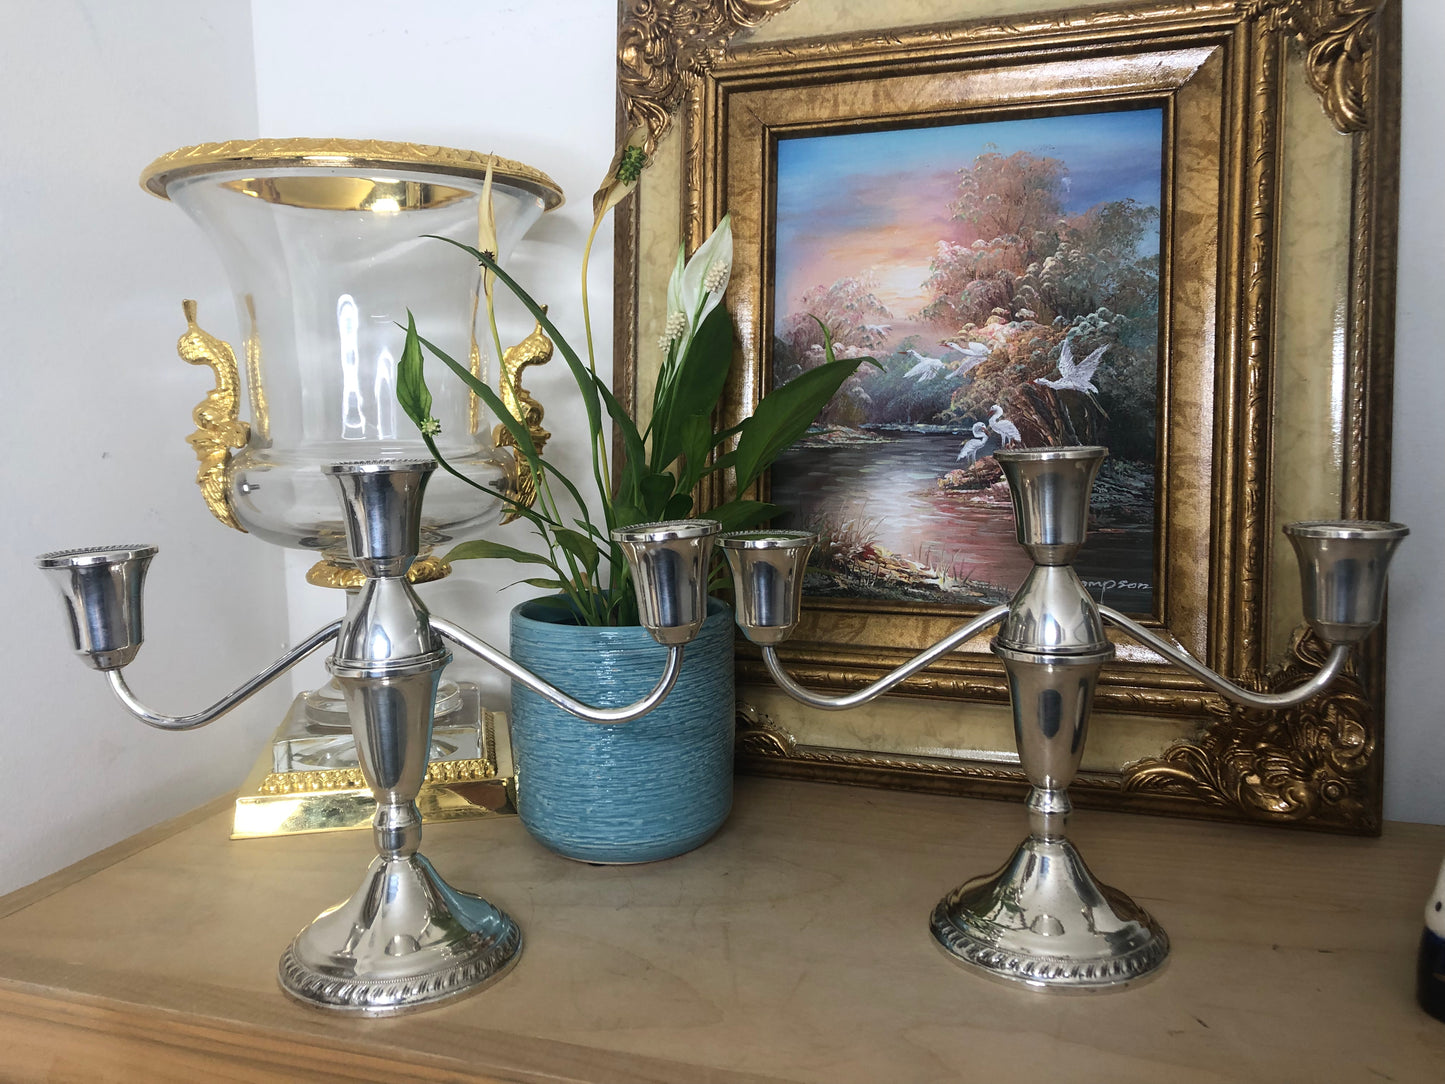 Stunning Sterling Weighted Candelabras Pair (2) - Excellent Condition!